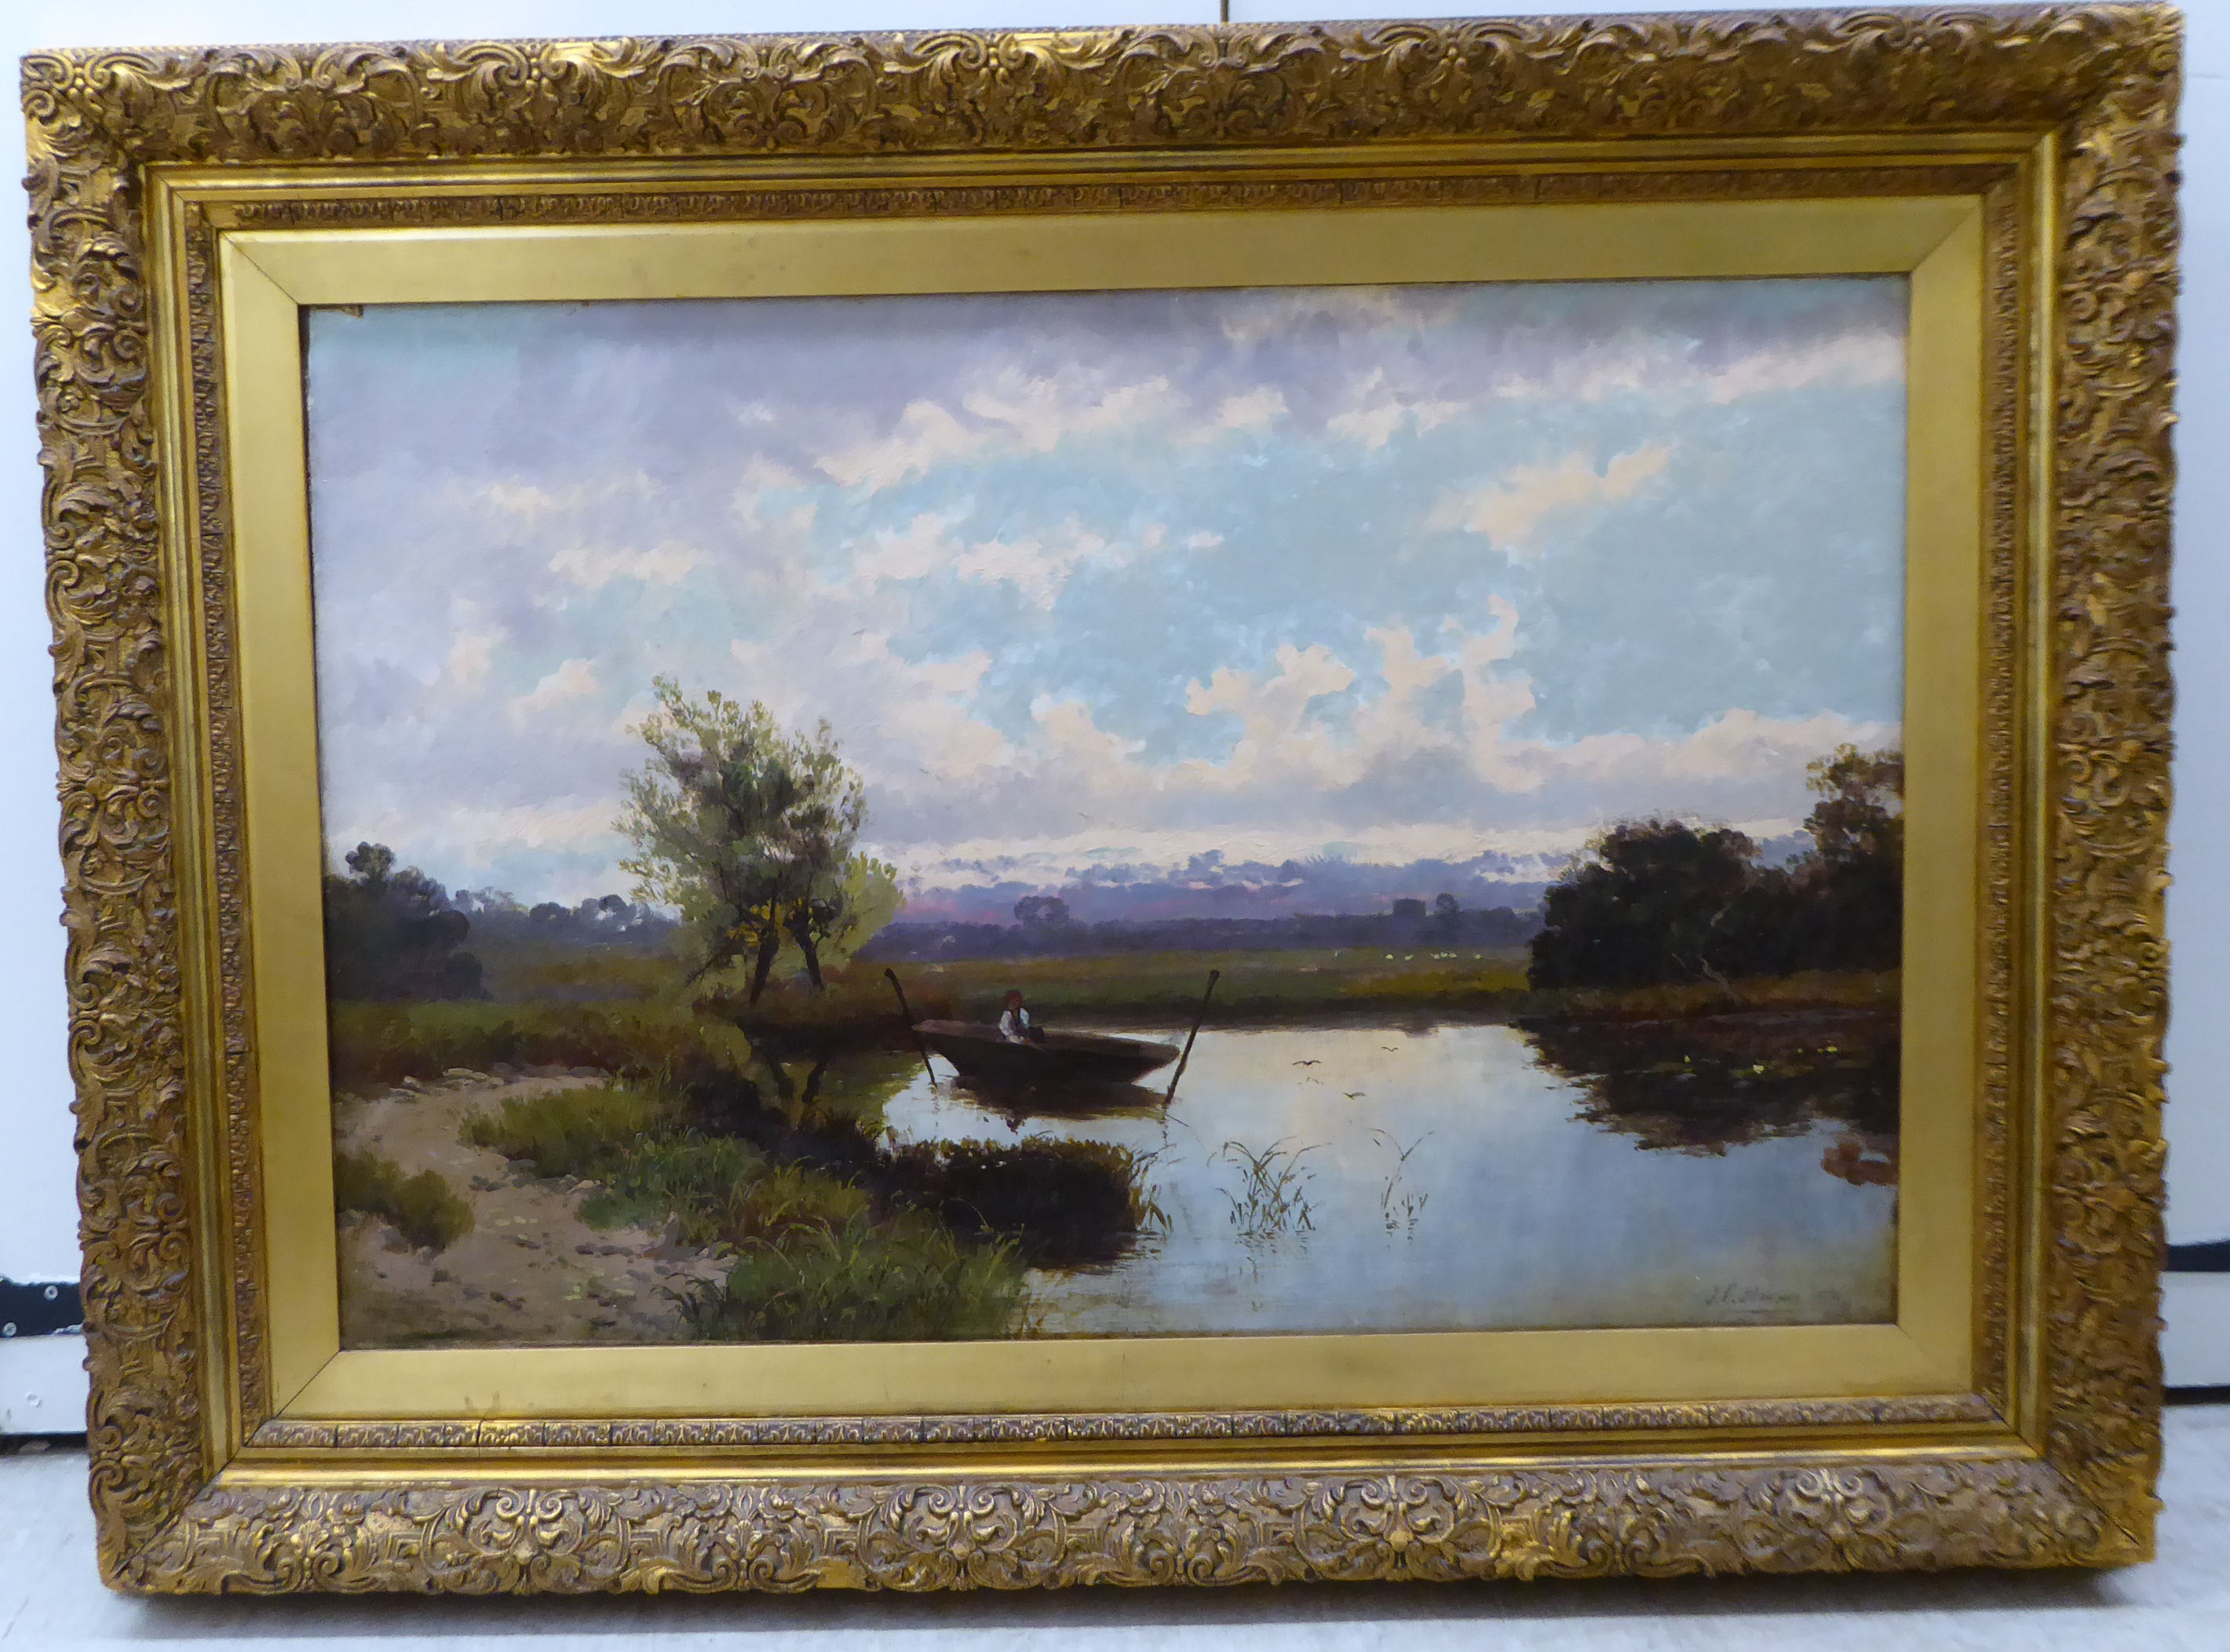 John Horace Hooper - a pastoral landscape with a lone figure fishing in a punt on still water in